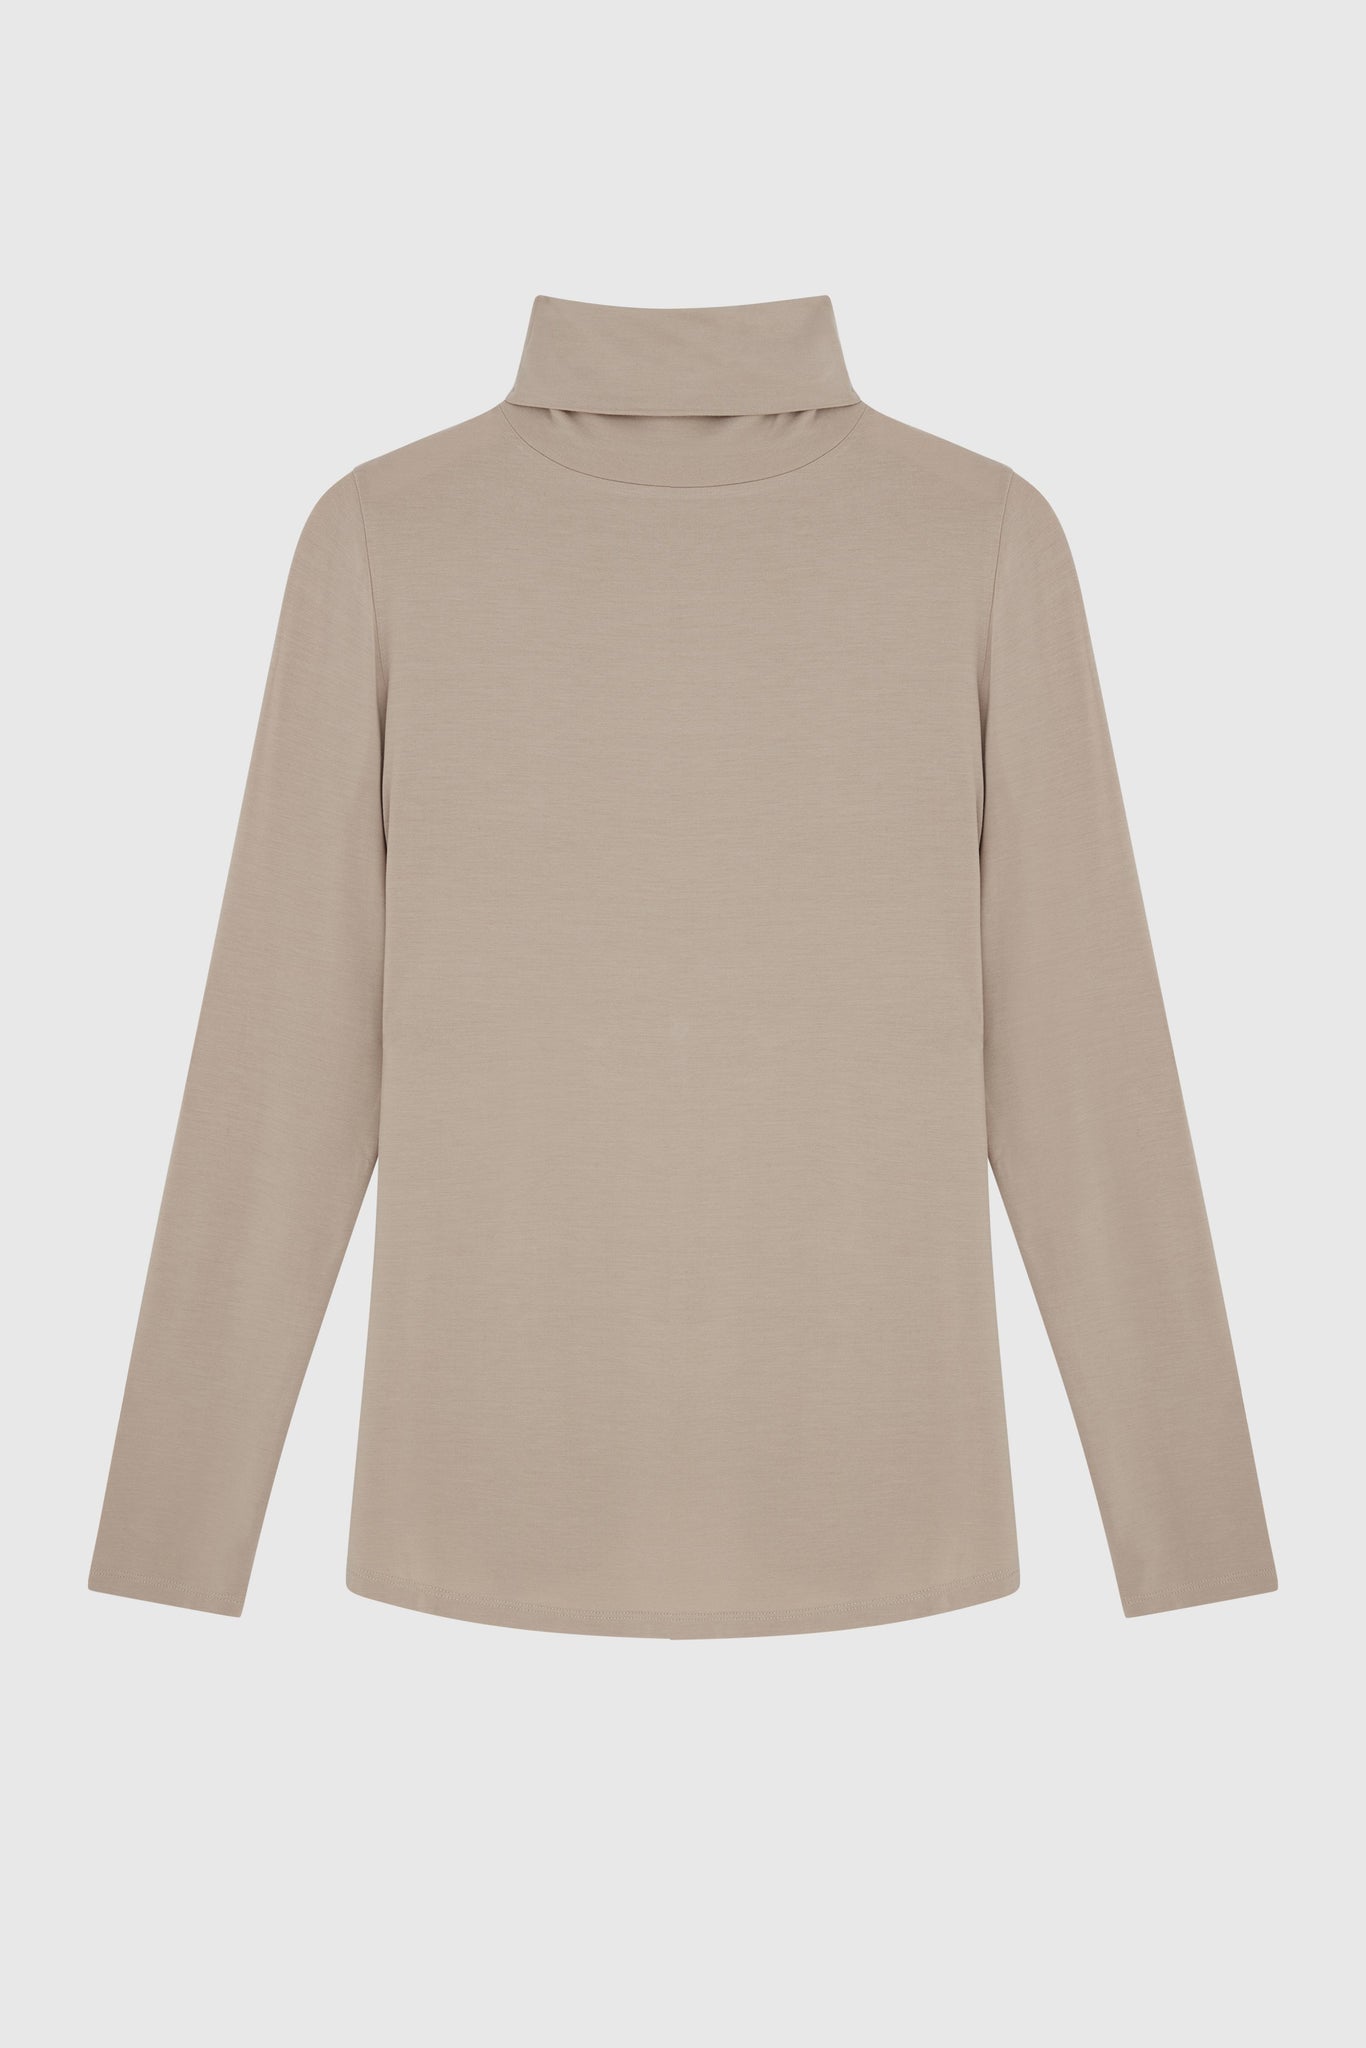 Women's High Quality Thermal Long Sleeve Taupe Roll Neck Top - Comfortable Polo Neck - Flattering Long Sleeve T-Shirt - Soft Taupe Long Sleeve Polo Neck by Lavender Hill Clothing